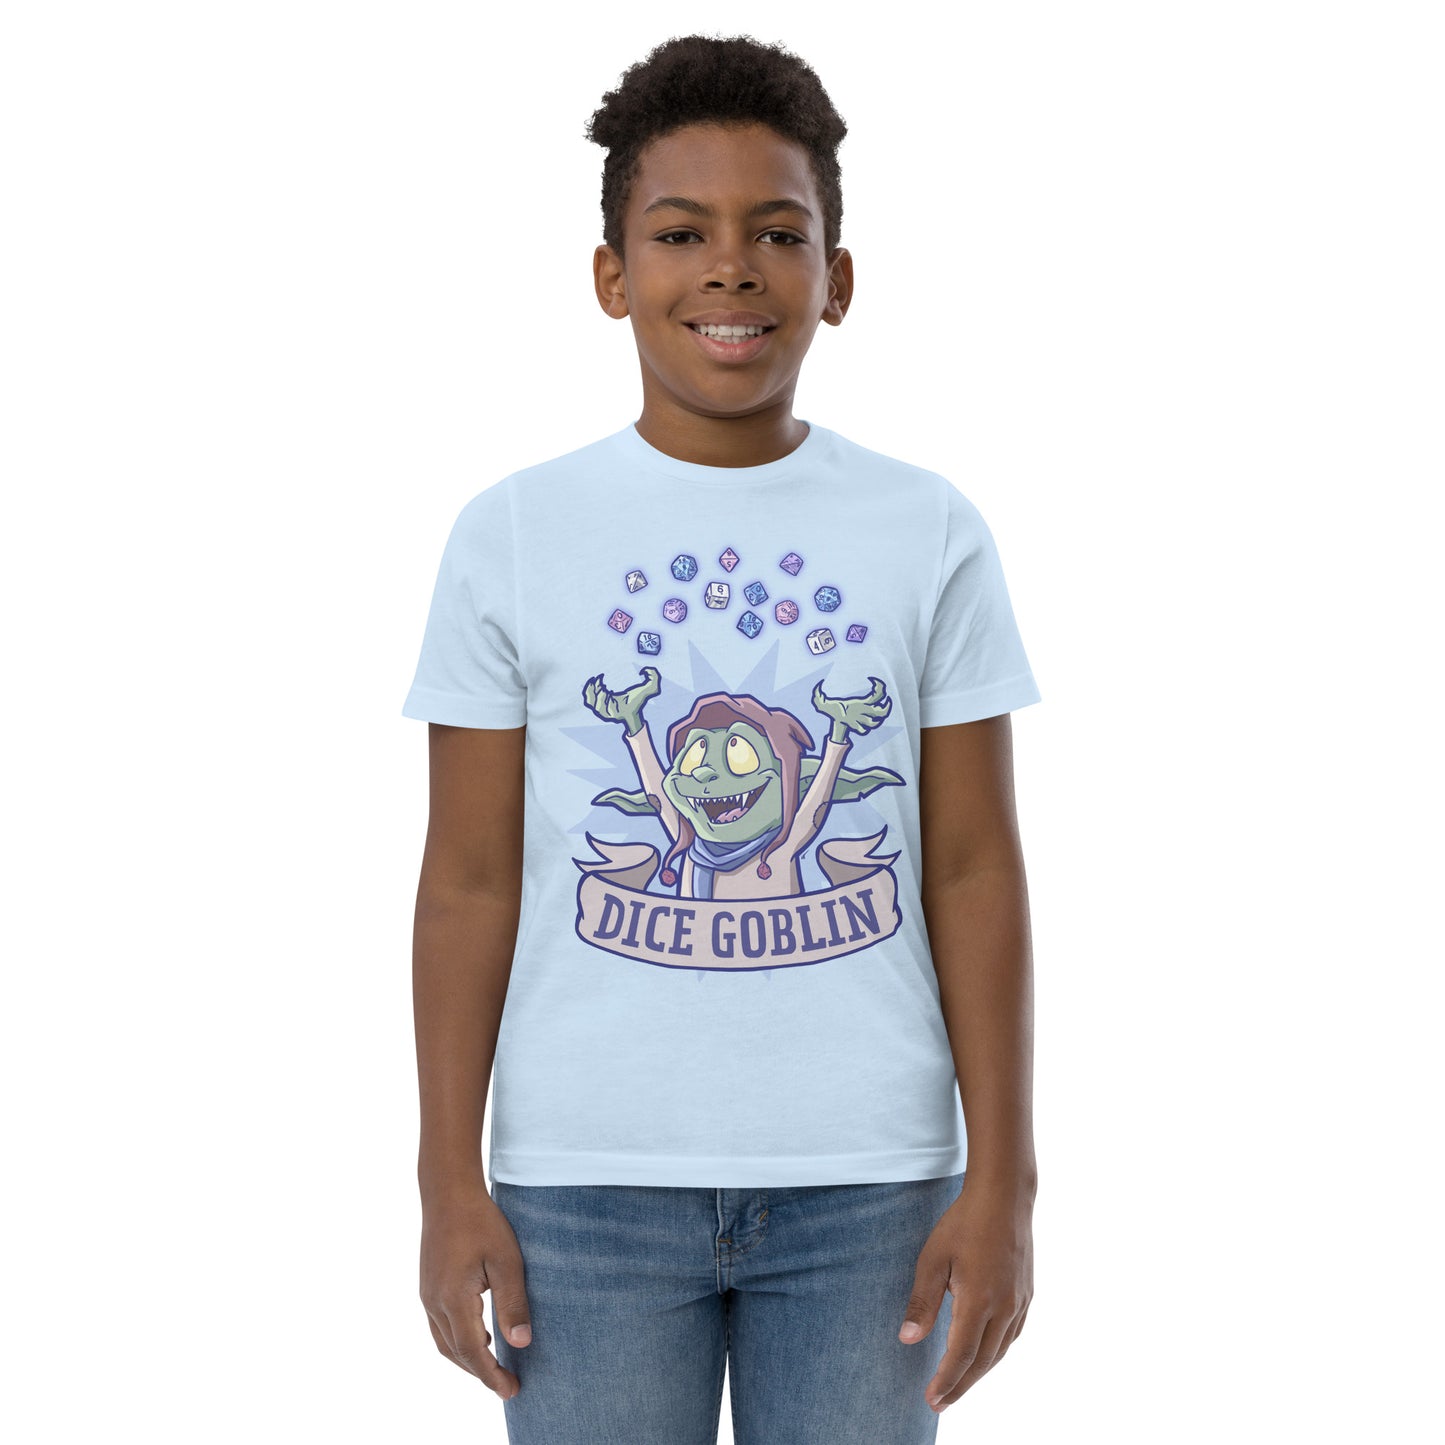 Dice Goblin Youth t-shirt  Level 1 Gamers Light Blue XS 